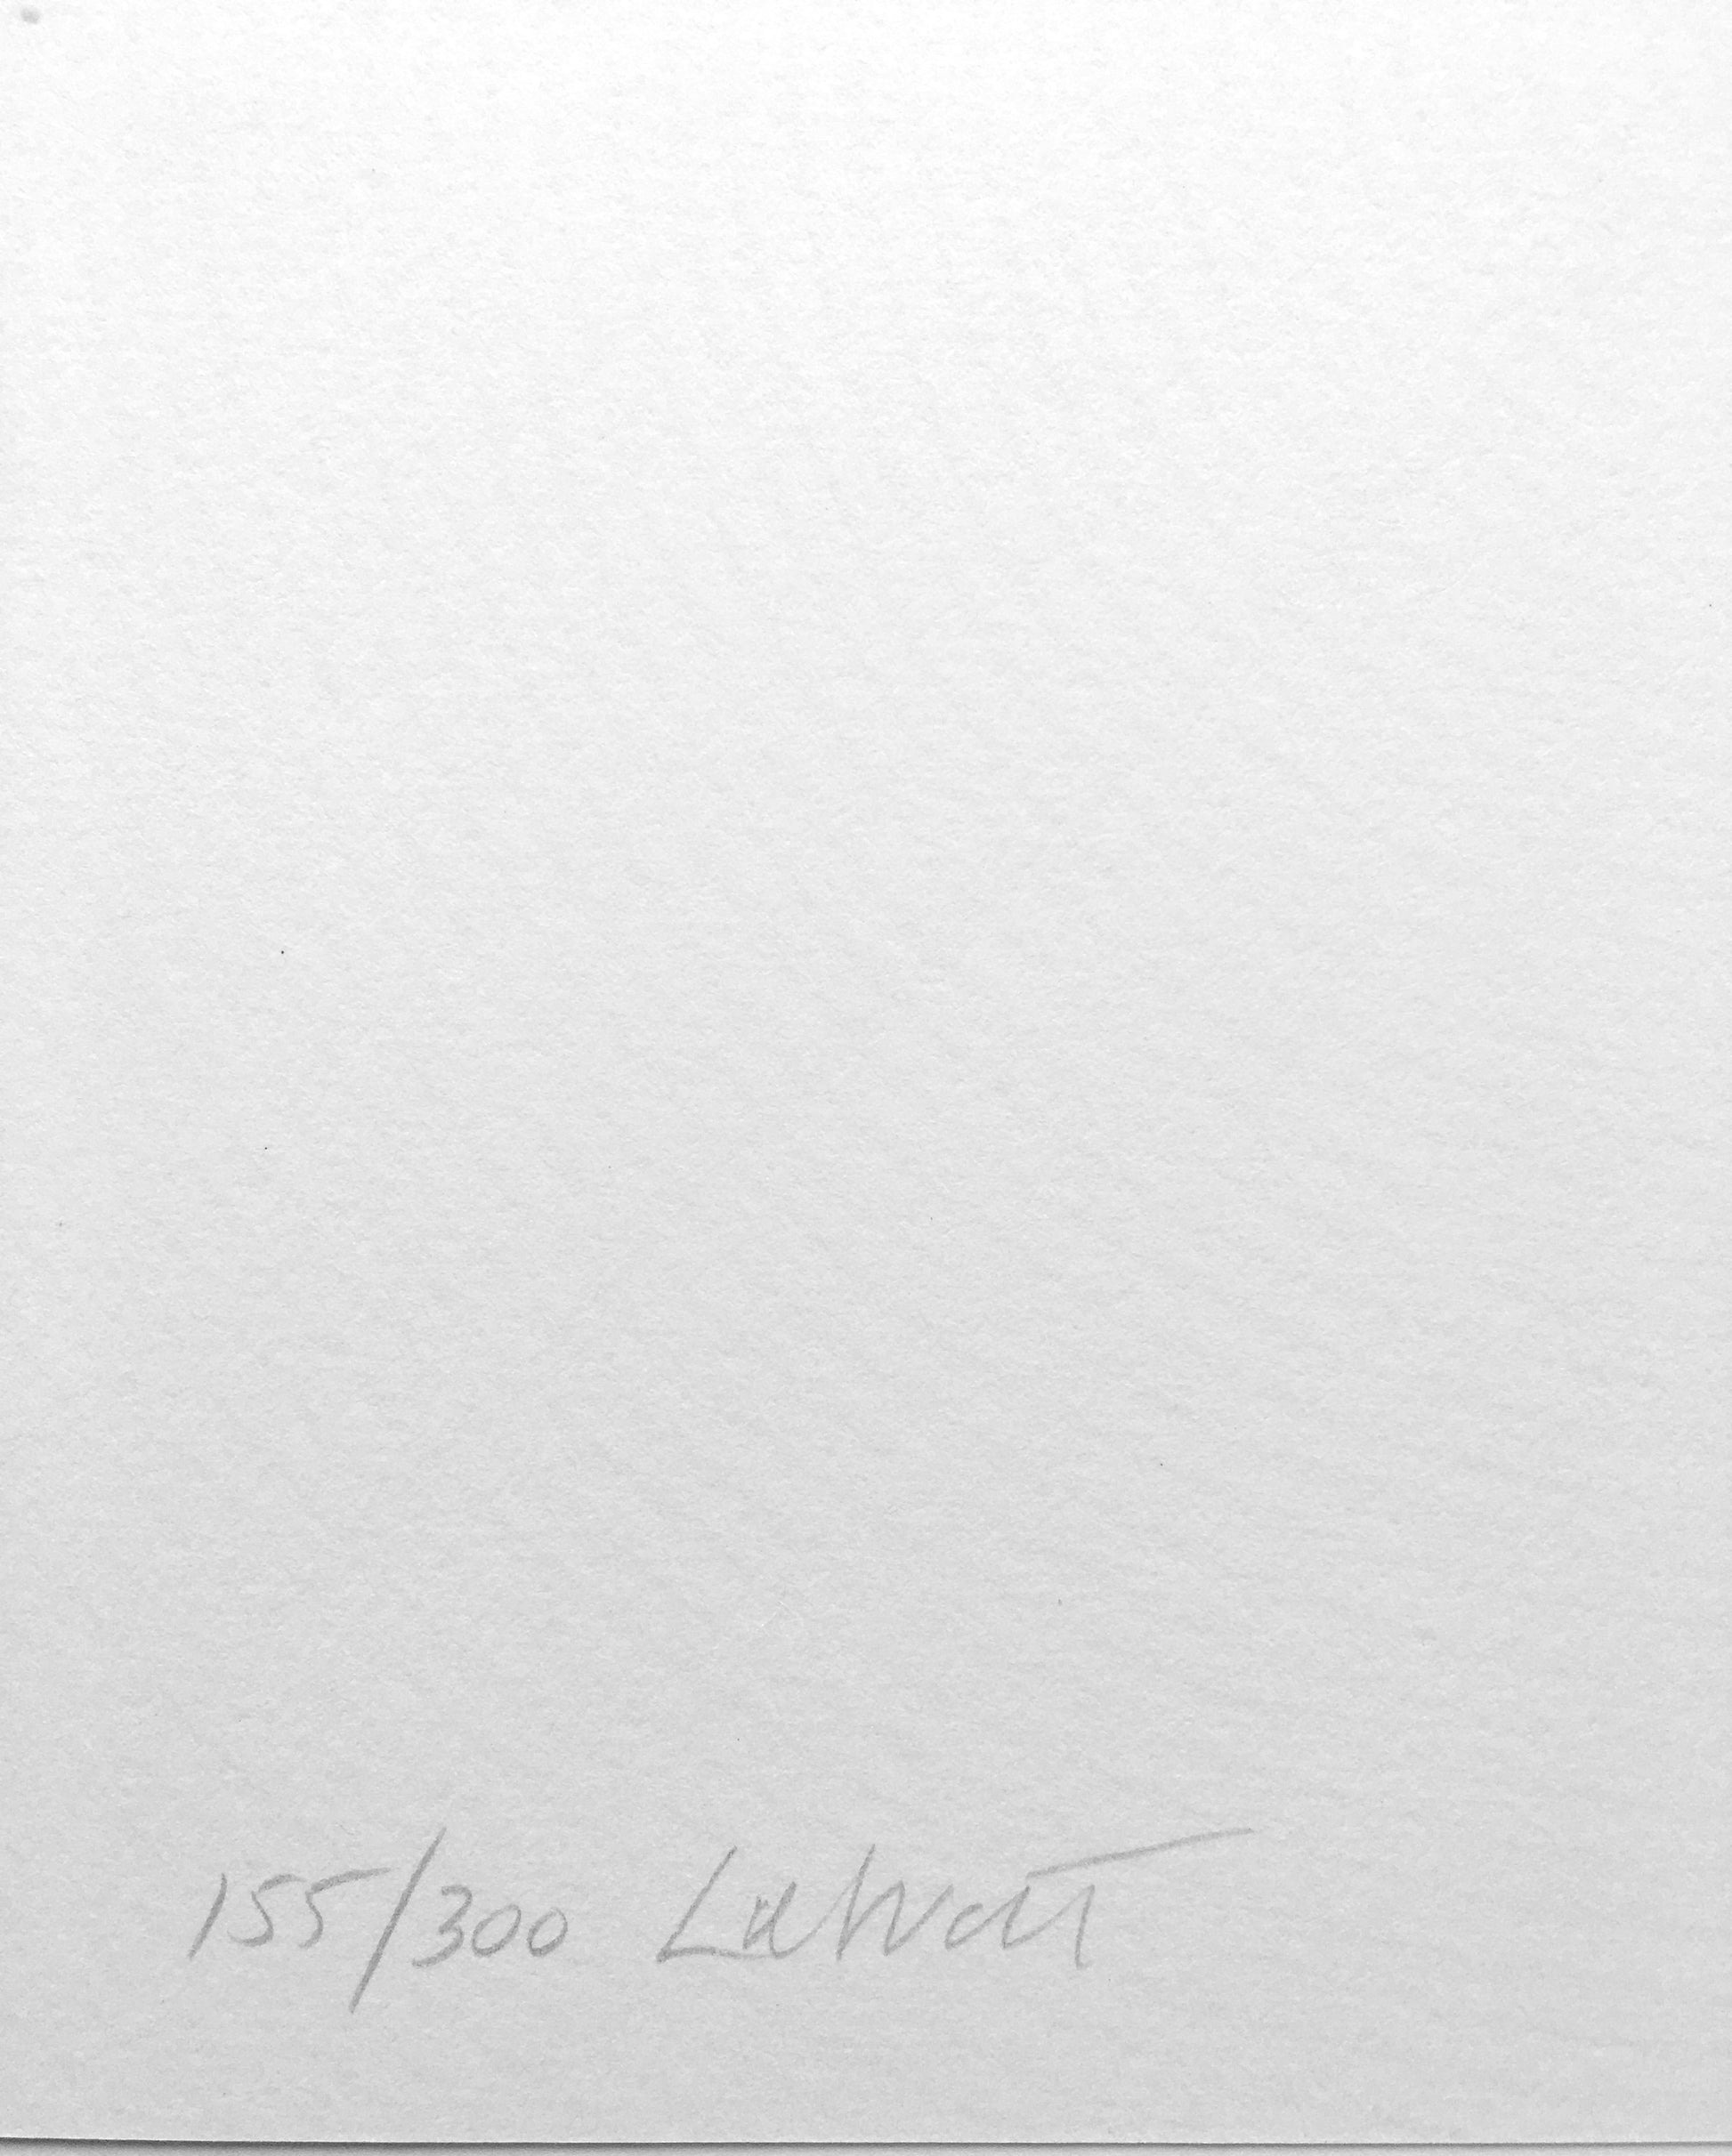 Sol Lewitt Circles, 1973 Lithograph detail of edition number and signature